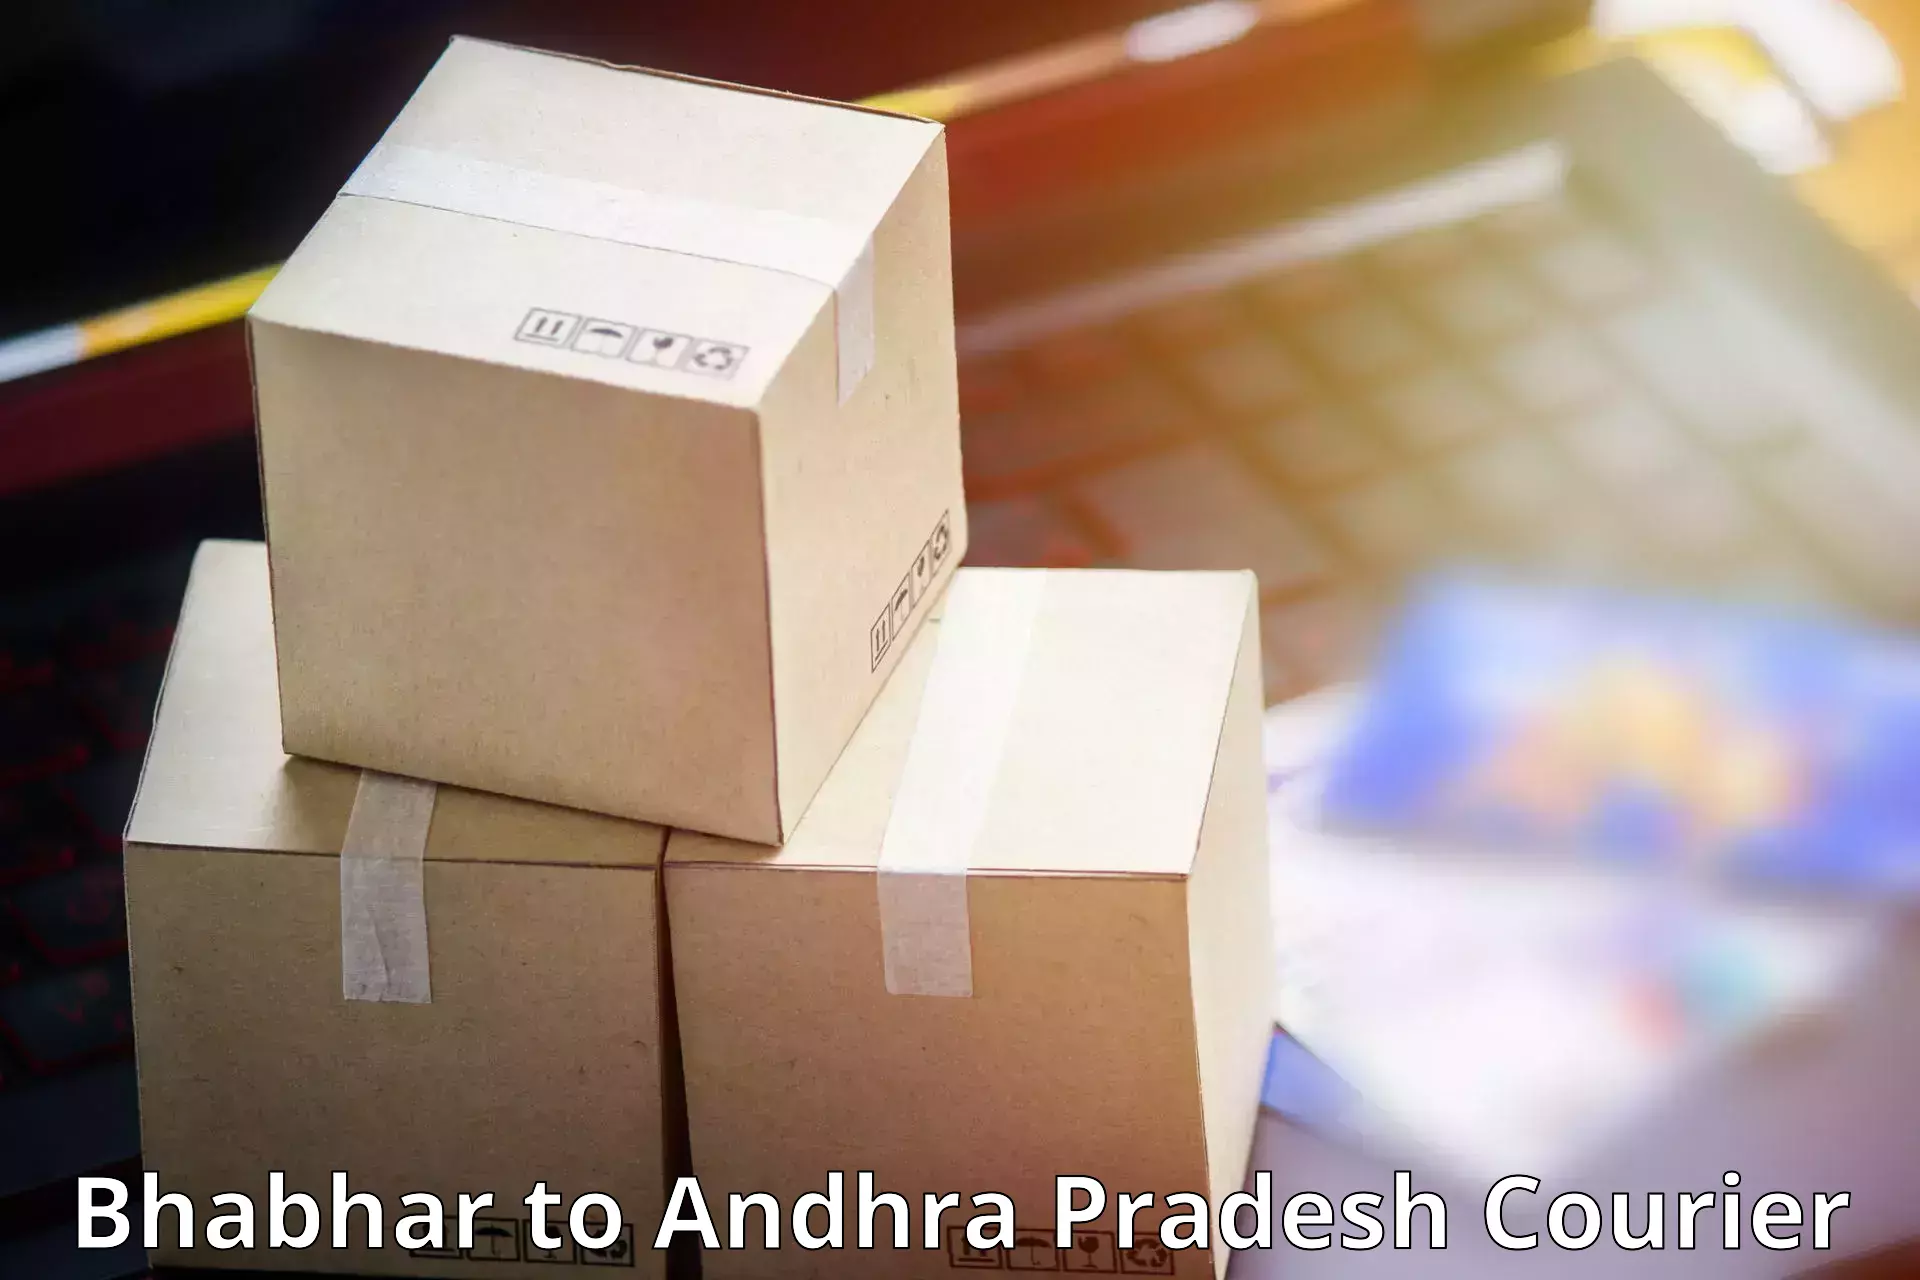 On-call courier service Bhabhar to Visakhapatnam Port